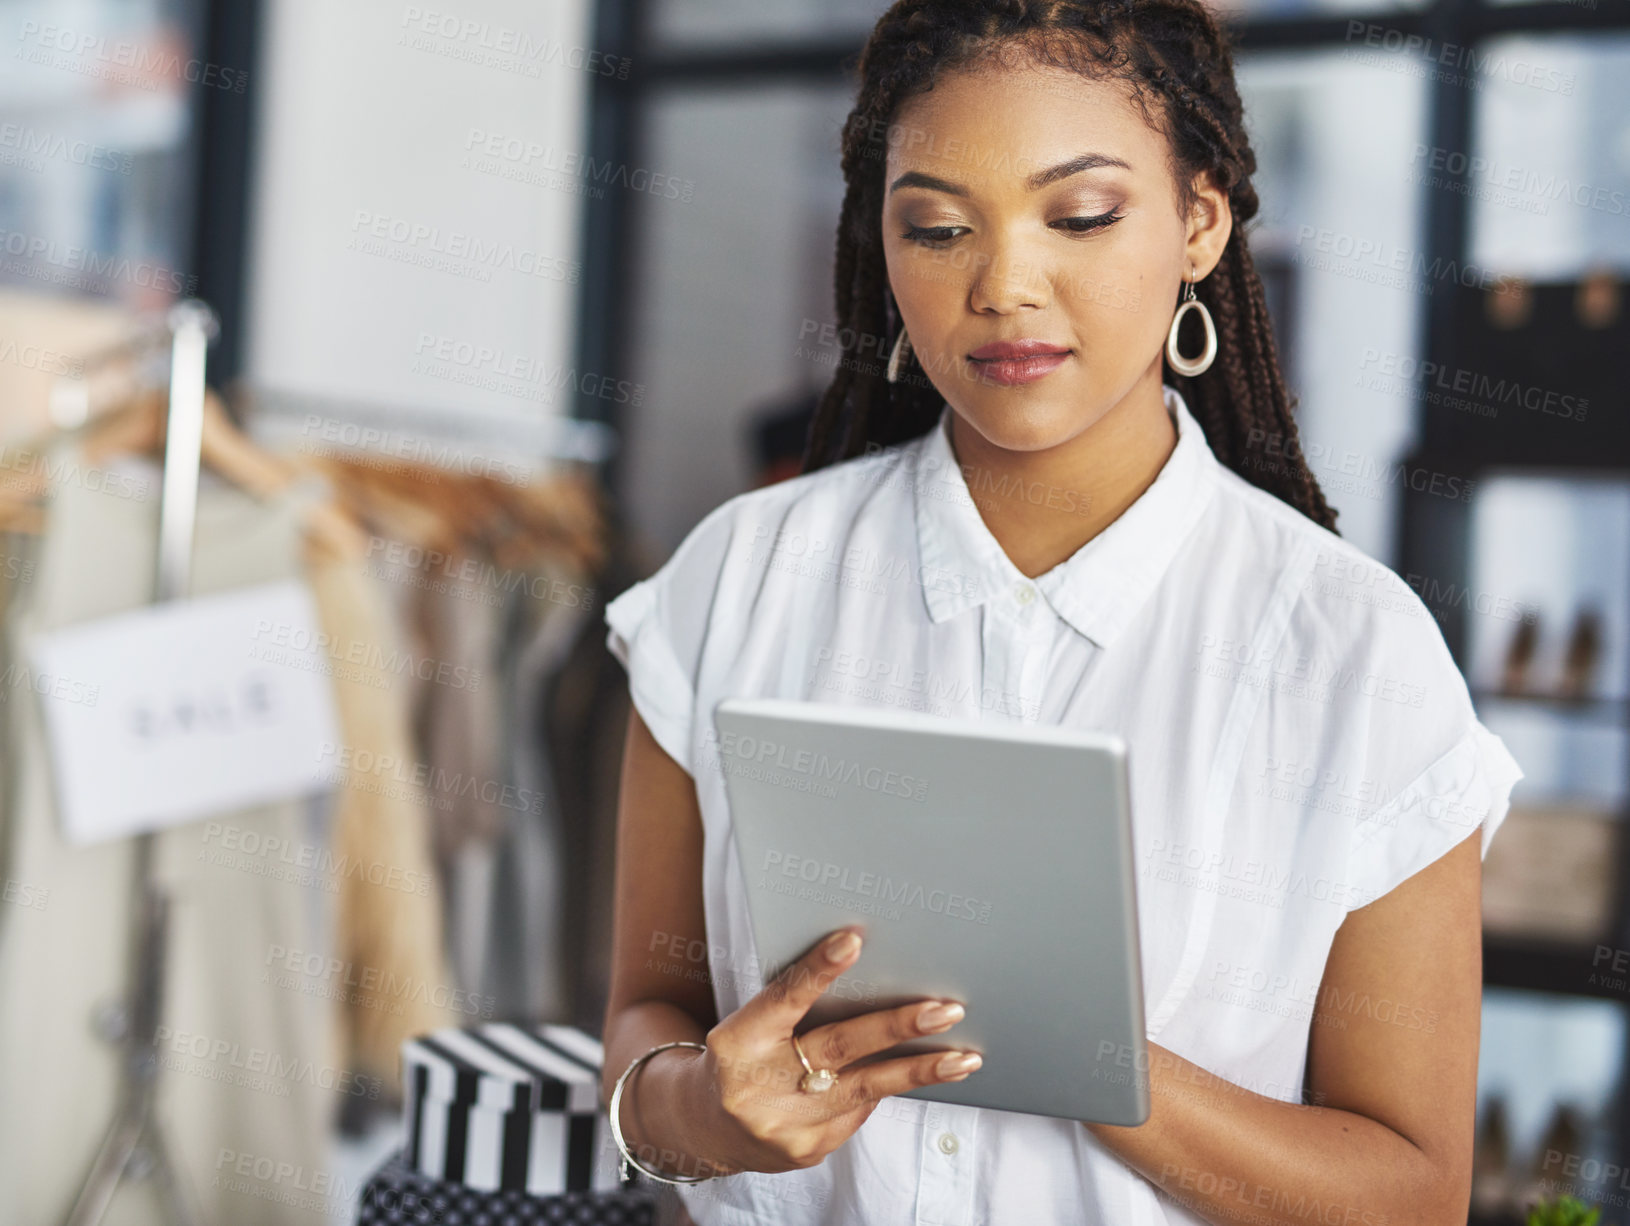 Buy stock photo Cropped shot of a young business owner using her tablet while standing in her store